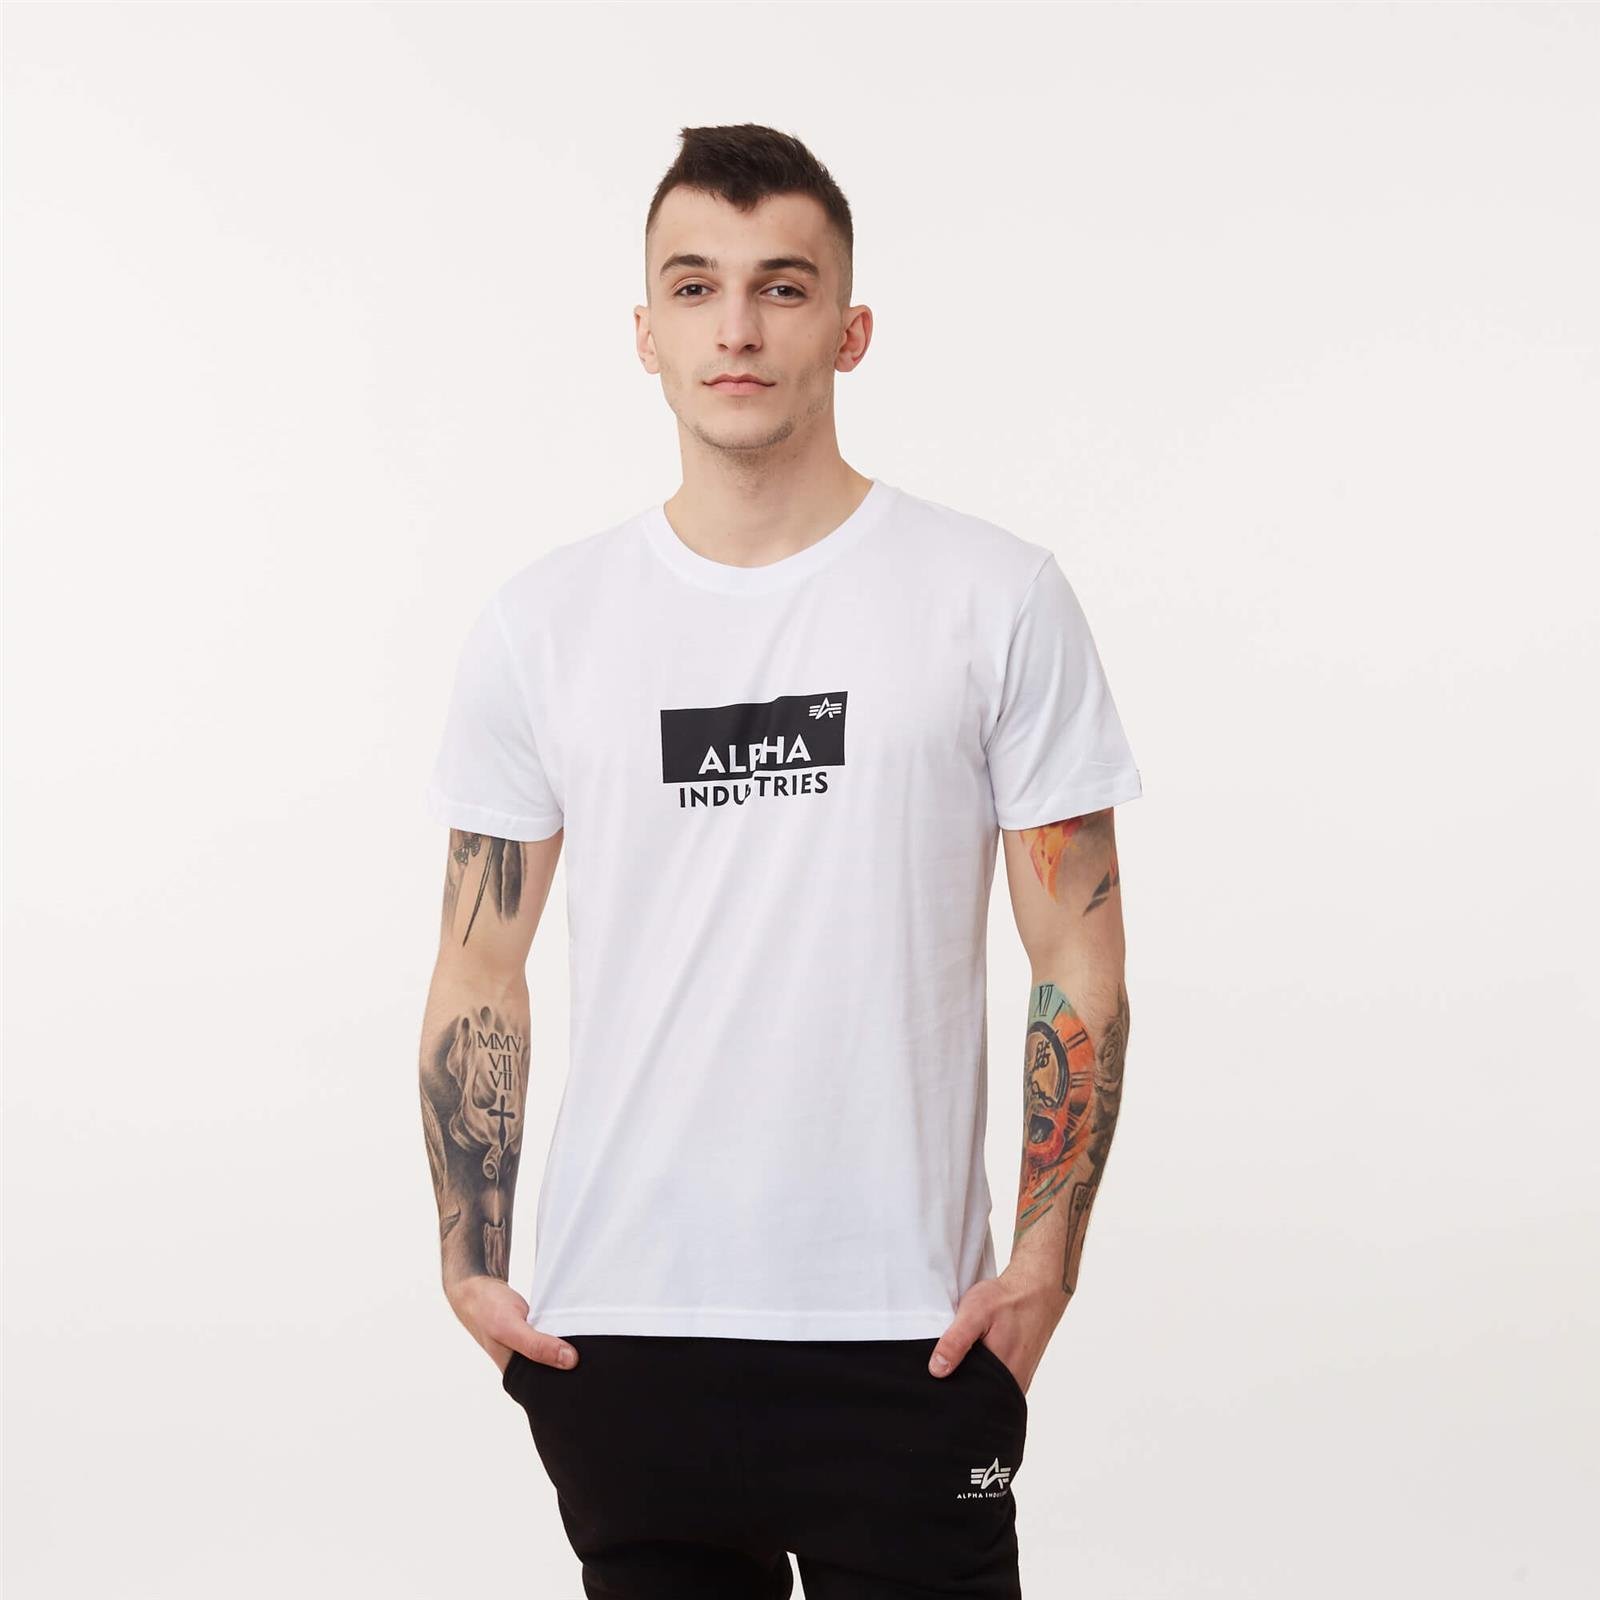 Alpha Industries LOGO WHITE Men's \ Men's clothing \ T-shirts Men's \ #Recommended clothing brands \ Ellesse Brands \ \ Alpha Industries